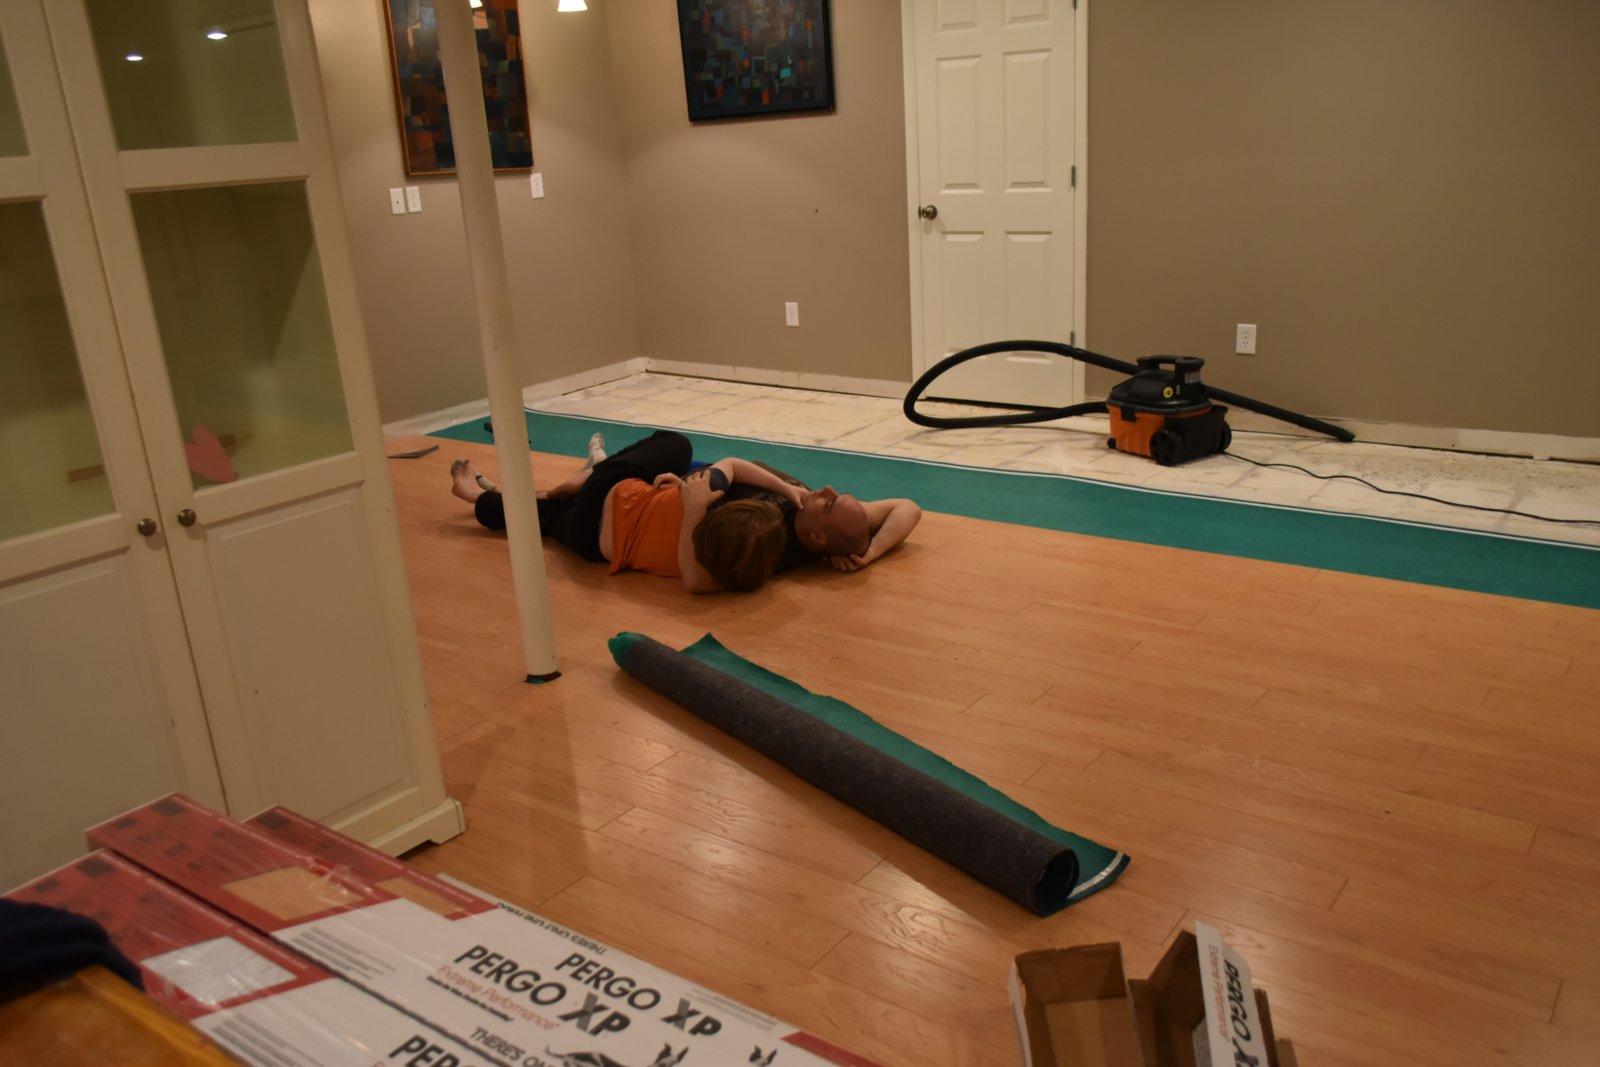 They needed to test the new flooring for snuggles.